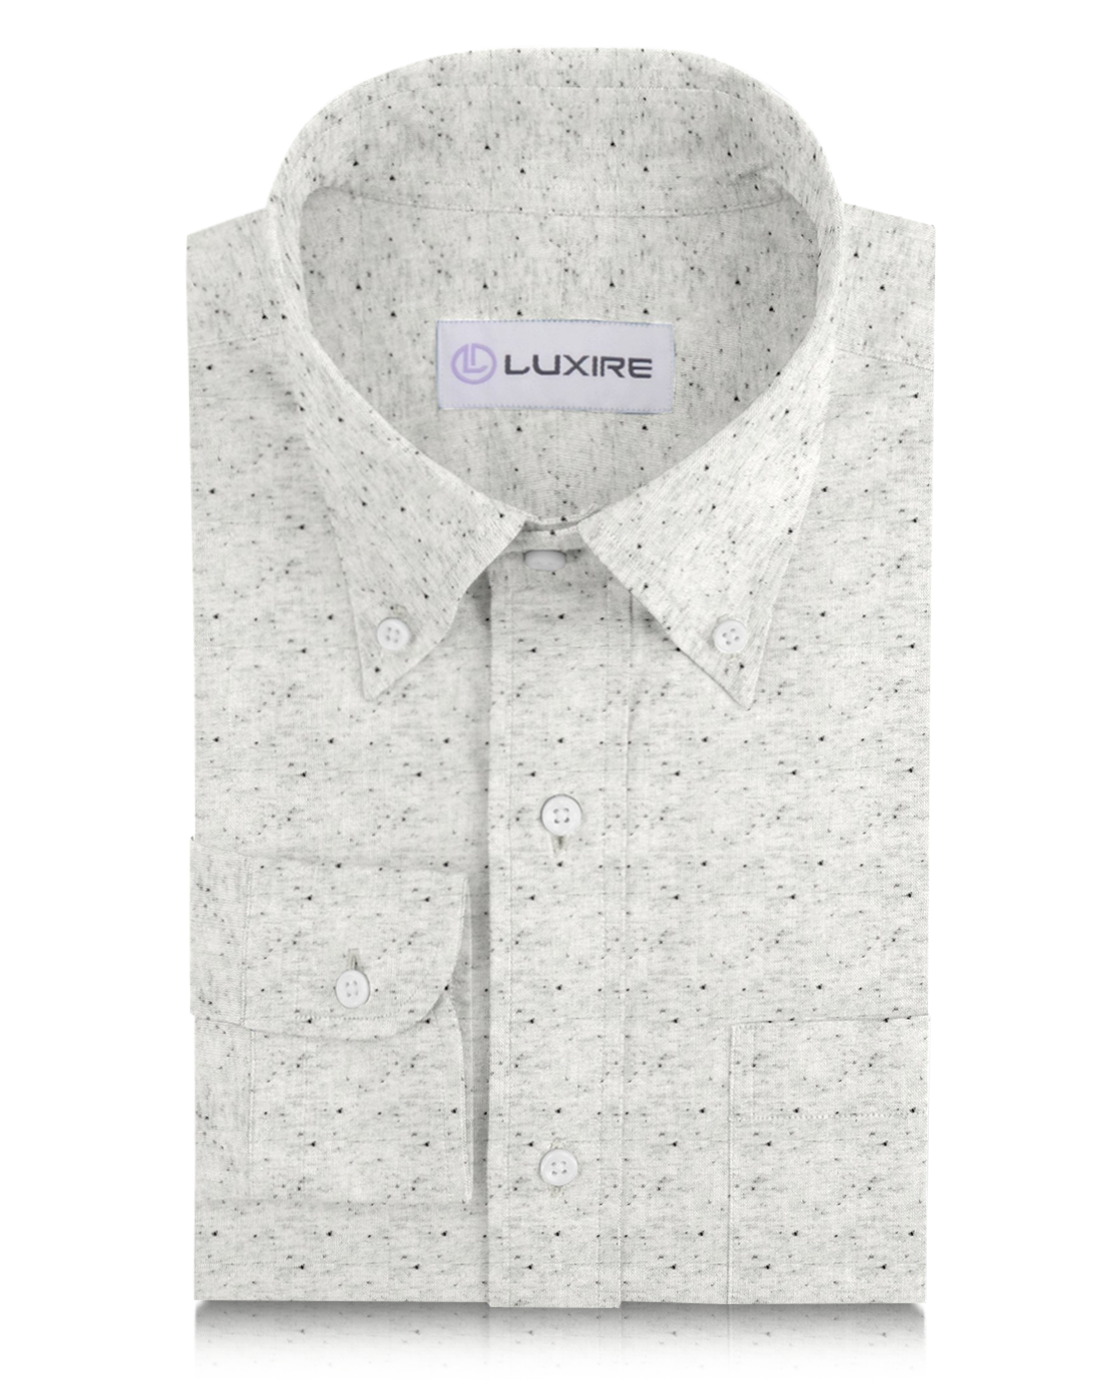 Front of the custom oxford polo shirt for men by Luxire in speckled light grey